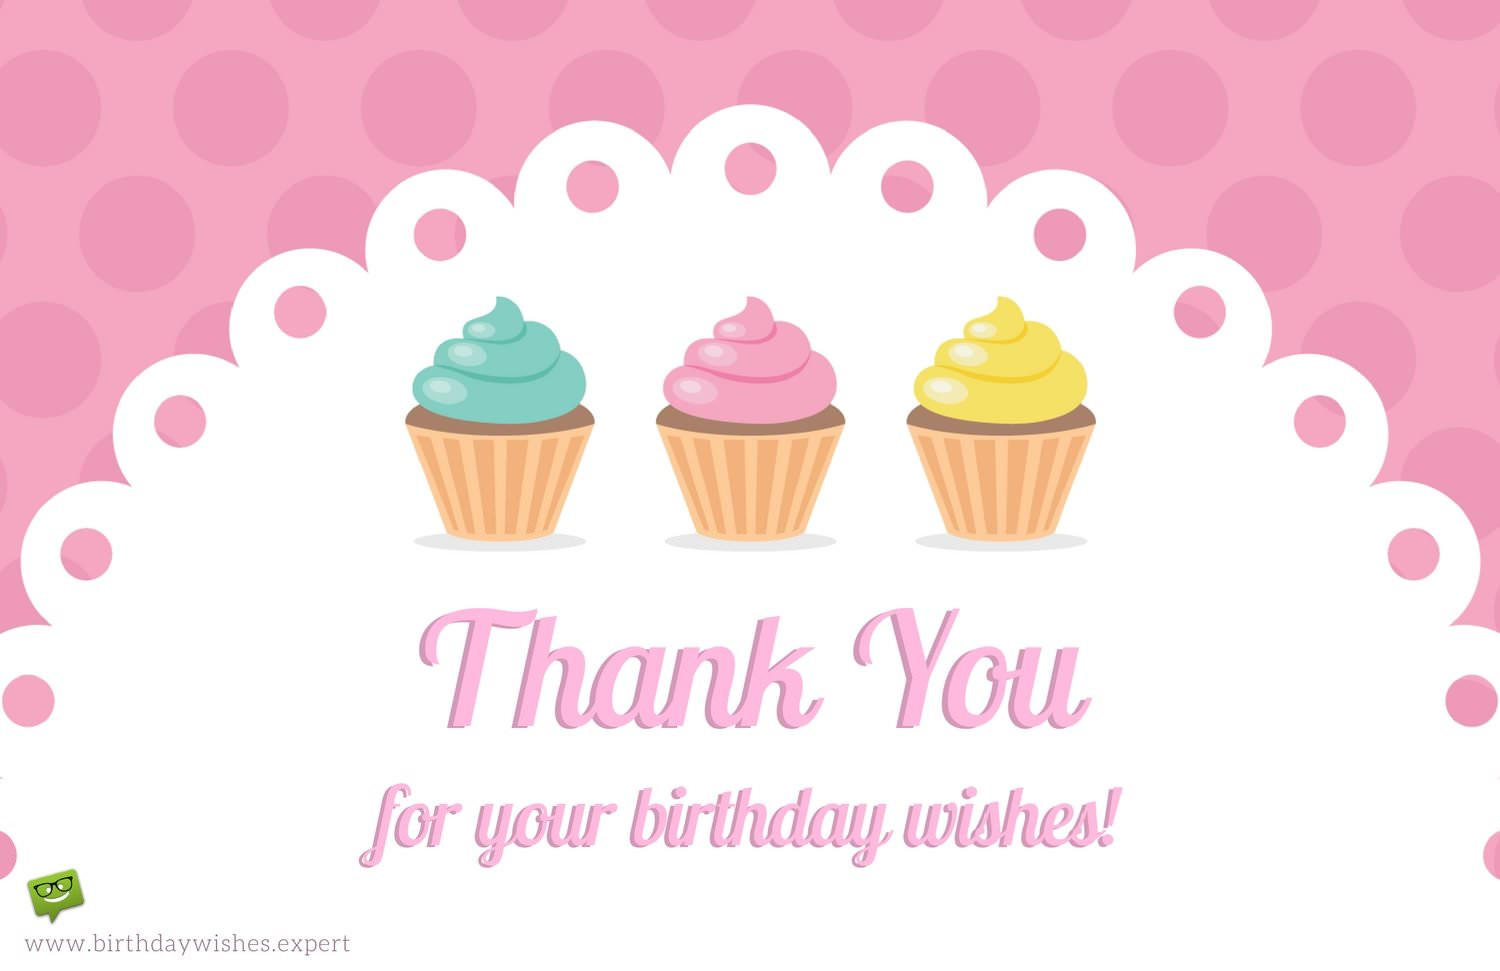 Thank You Images For Birthday Wishes
 Thank You Notes for Your Birthday Wishes